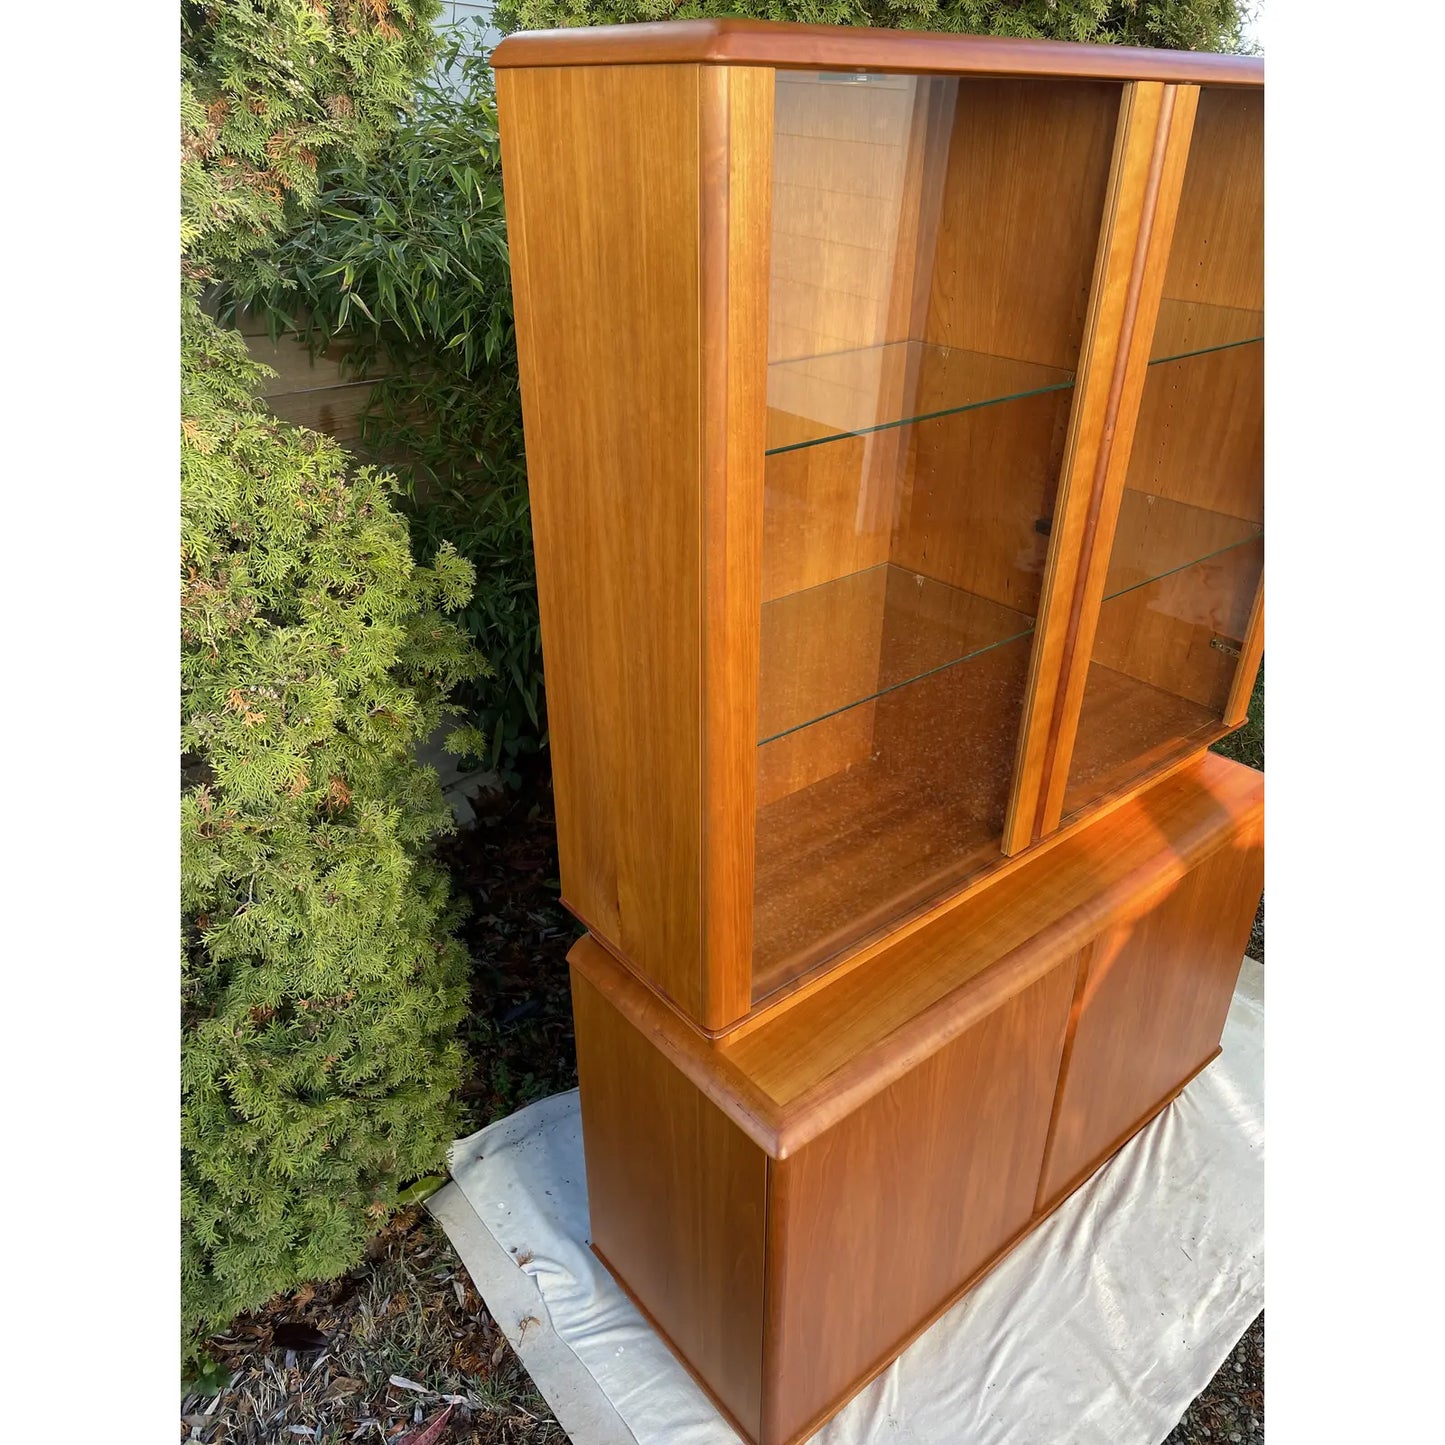 Late 20th Century Vintage Two Piece Teak Display and Hutch by Nordic Furniture - Ontario, Canada